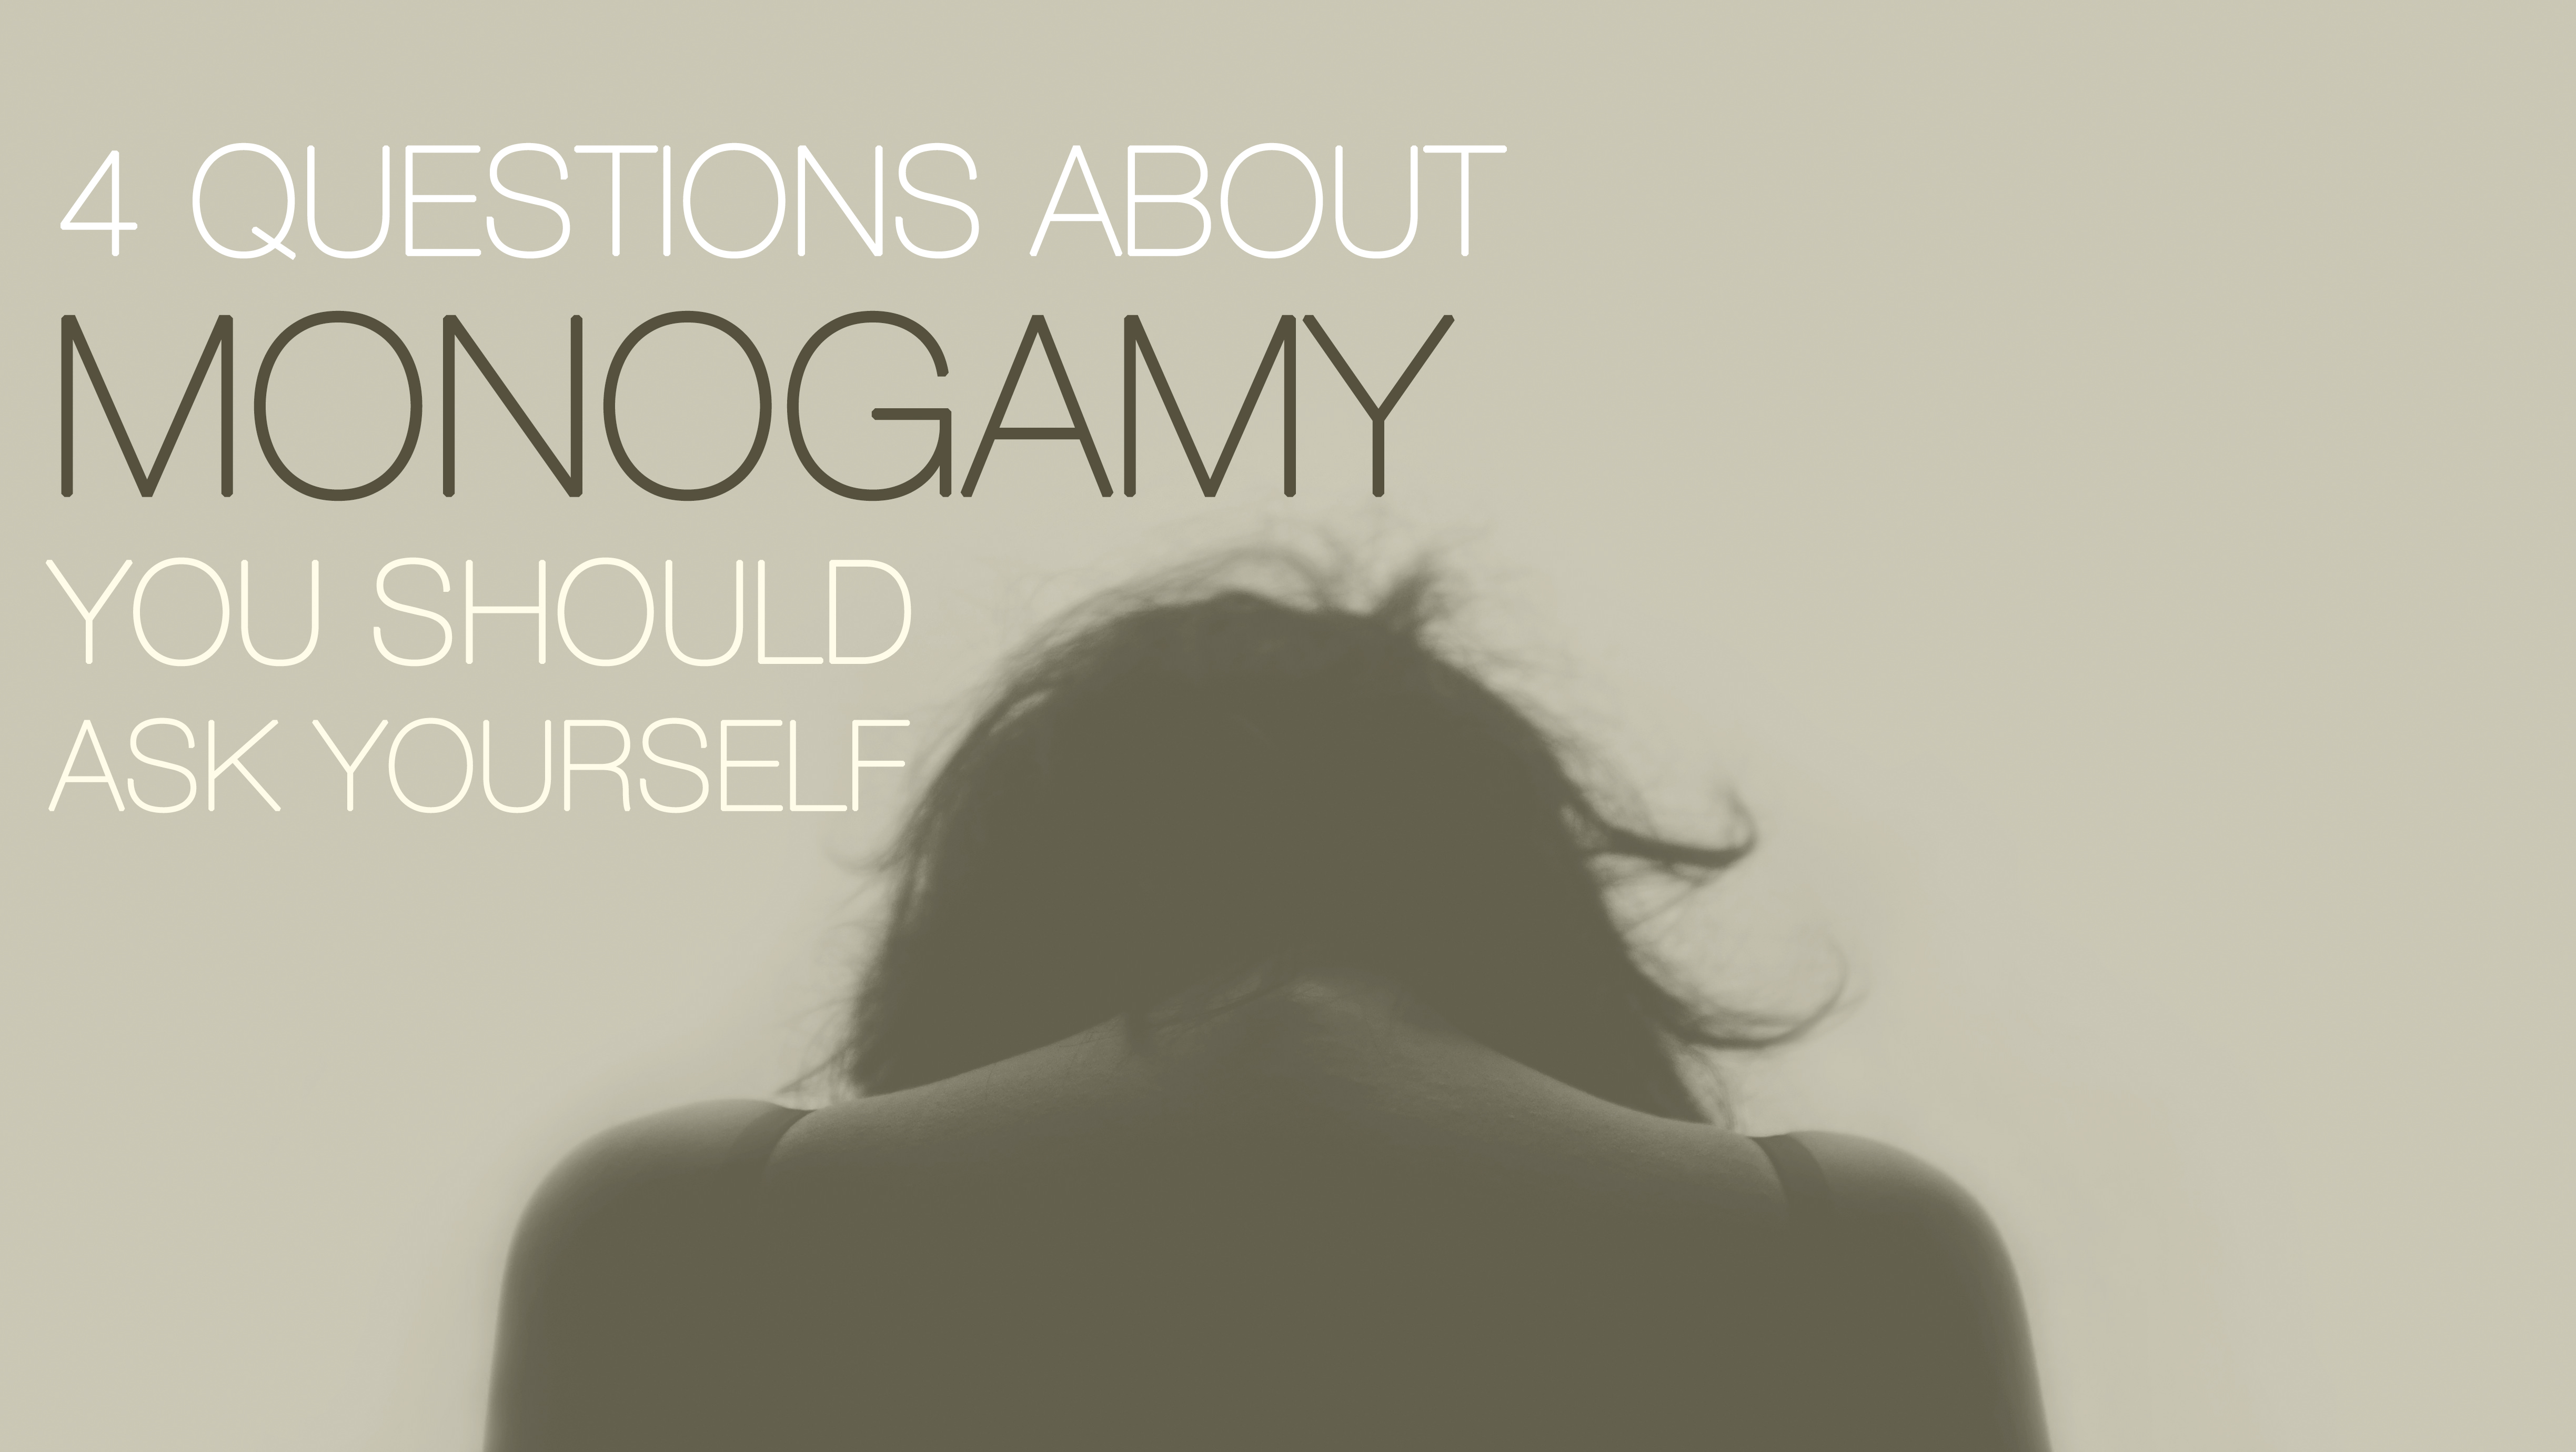 4 Questions About Monogamy You Should Ask Yourself